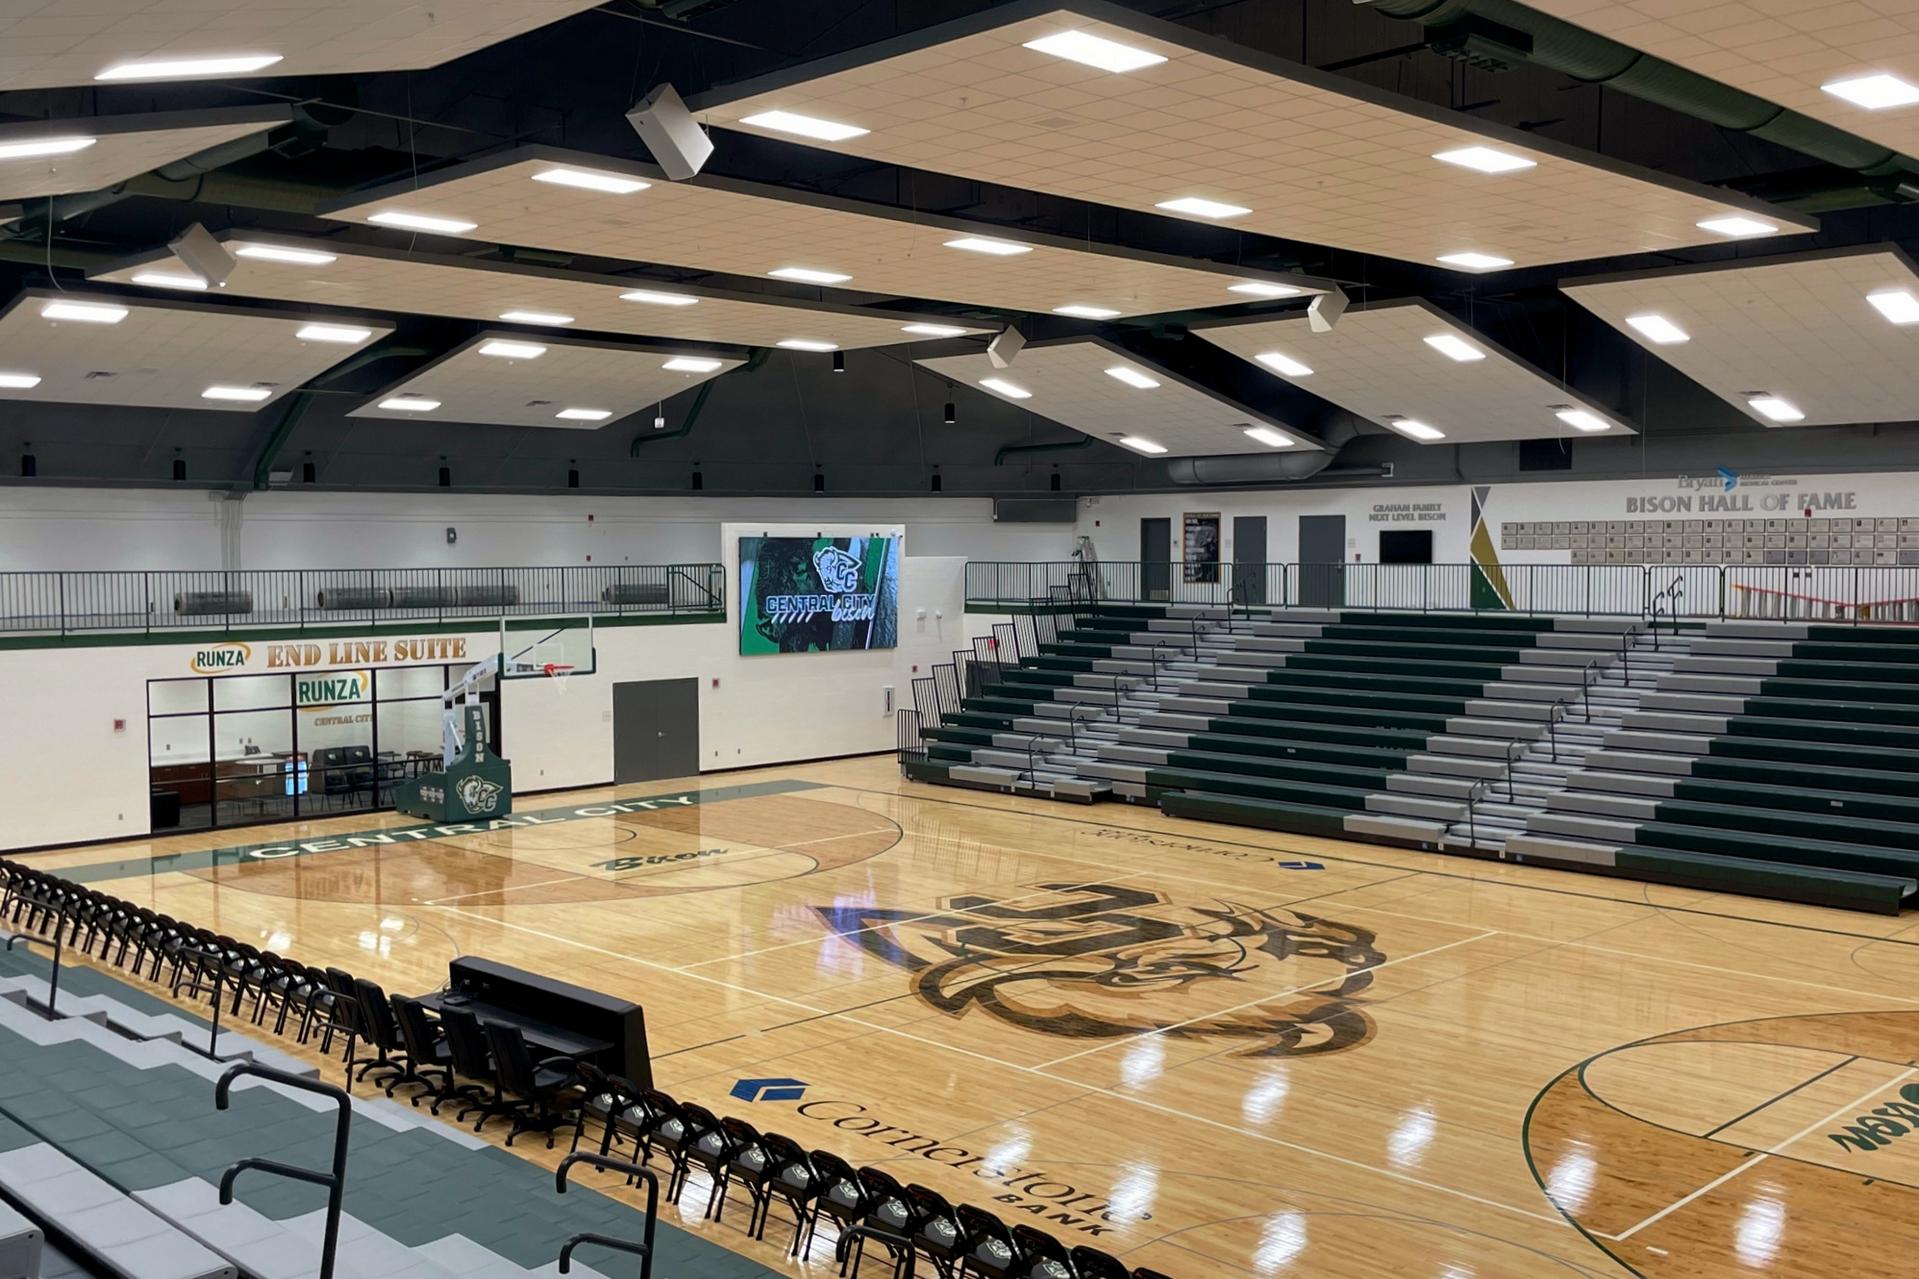 The competition court gymnasium at Central City High School.